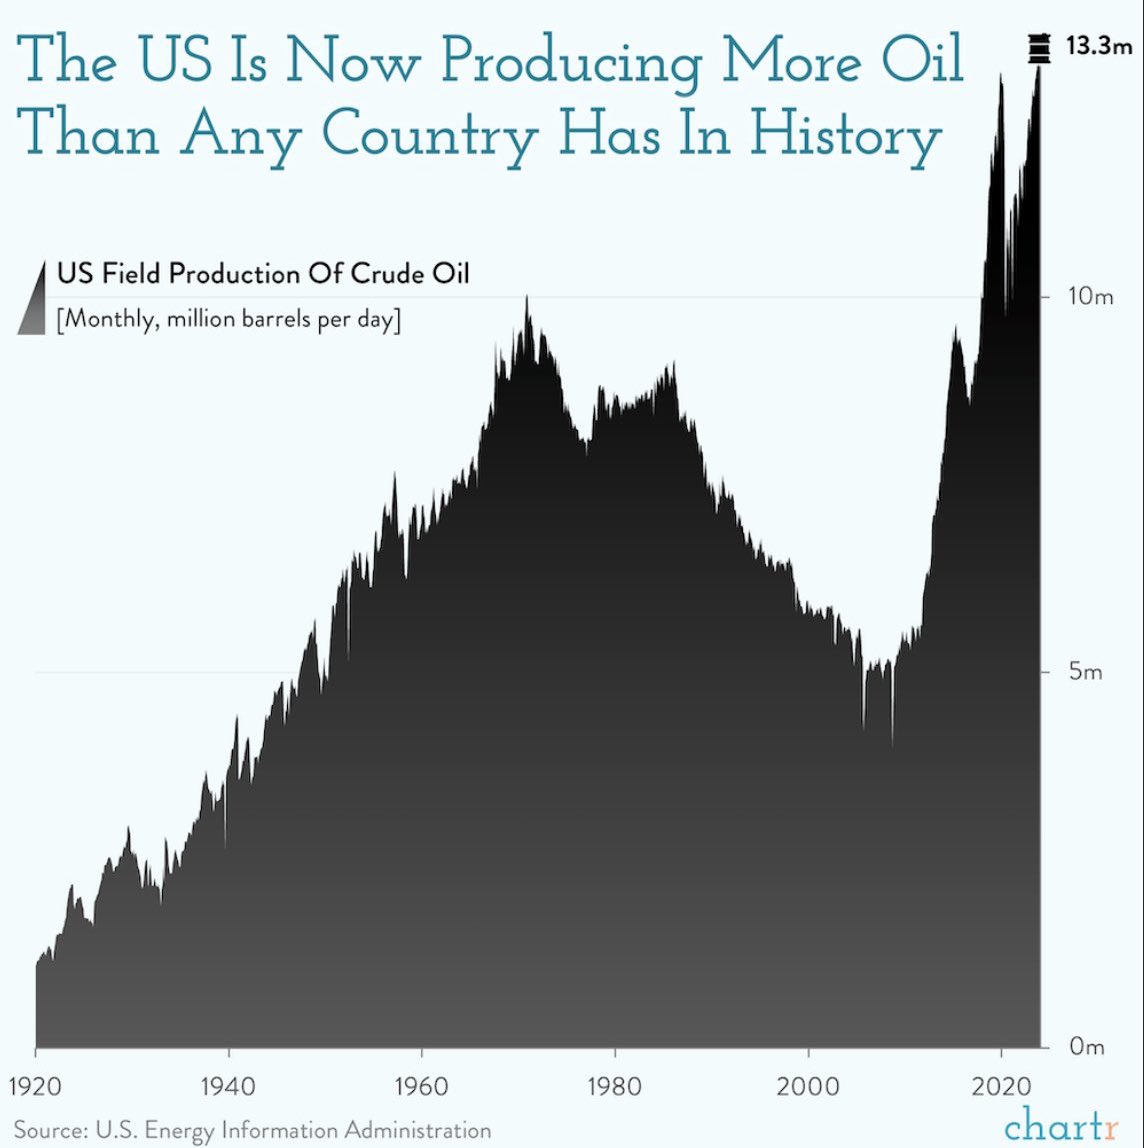 Despite the blizzard of Russian disinformation convincing Americans that their country has problems that it actually doesn't, on almost every metric, the US is absolutely killing it. US oil exploration is one of those. No one is even close.